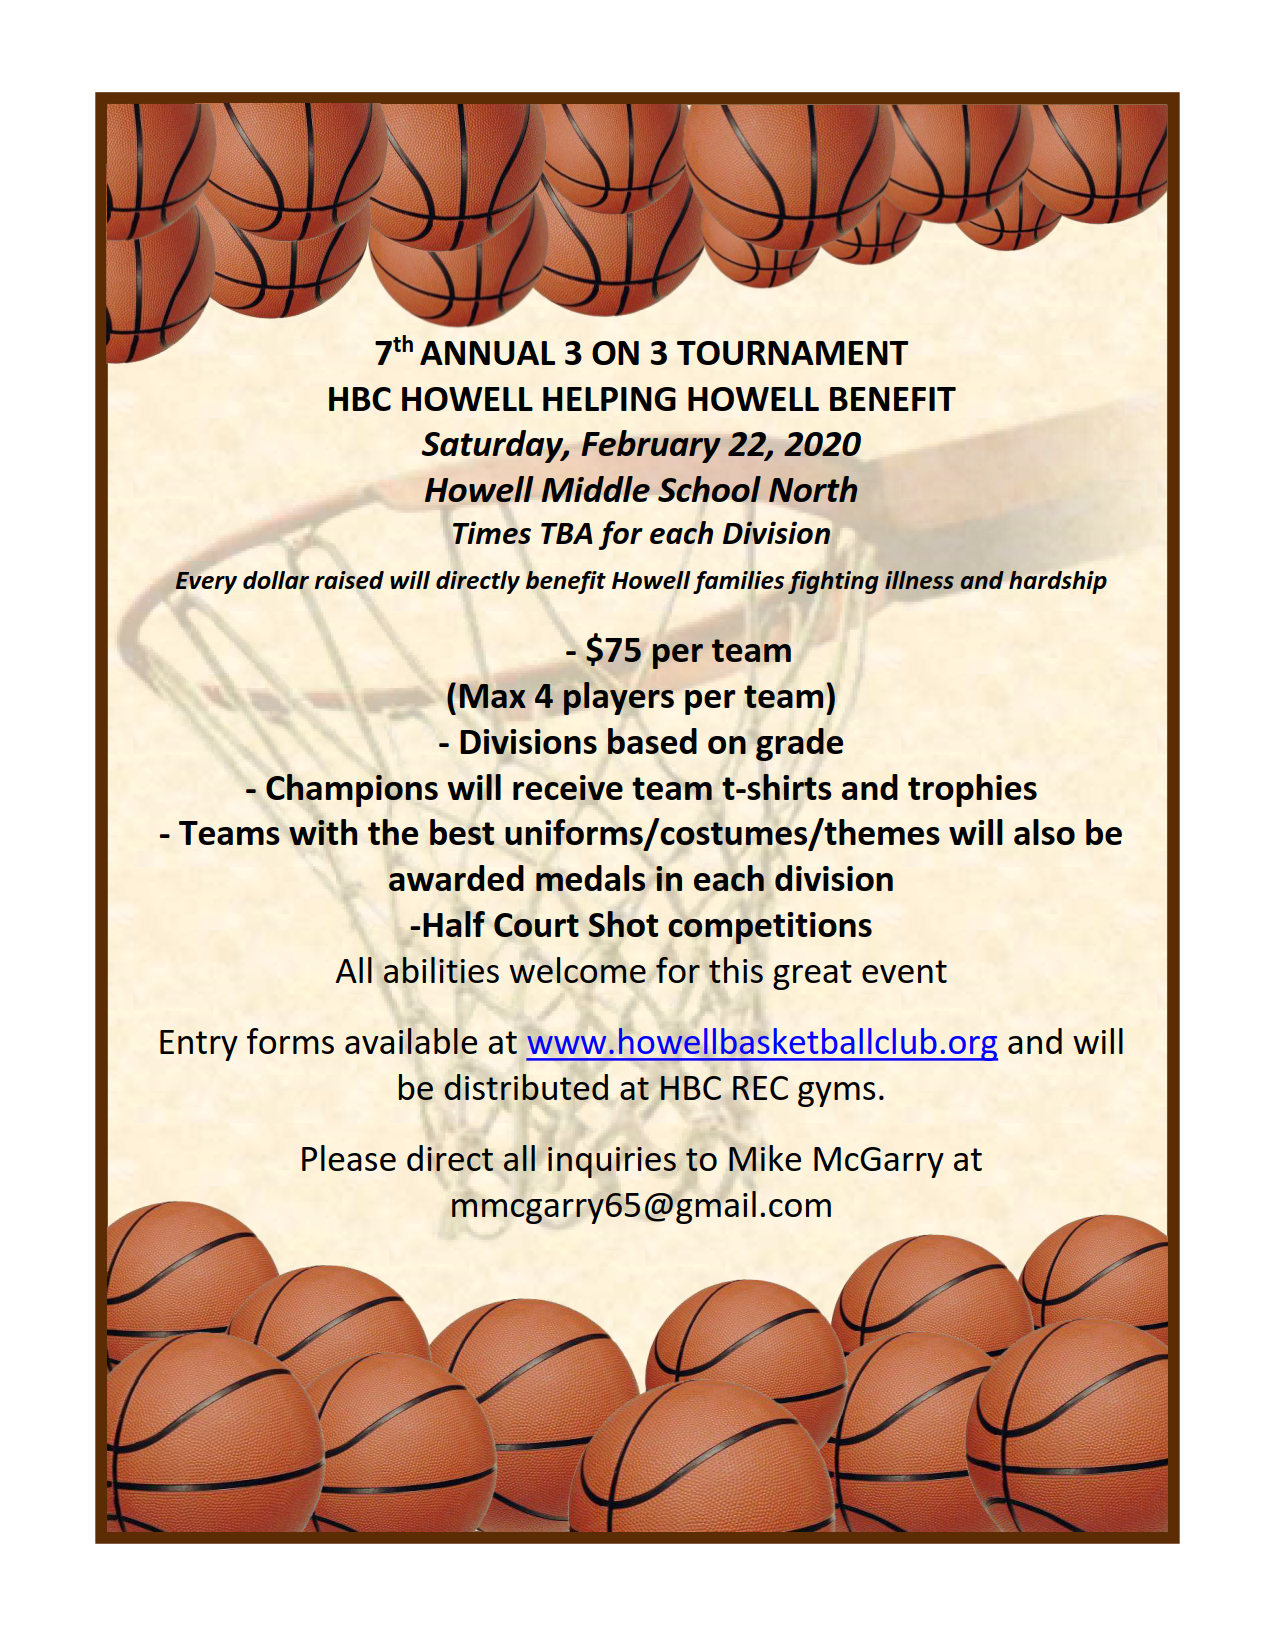 2020 HBC 3-on-3 Tournament - Howell Helping Howell Benefit Flyer 1_1